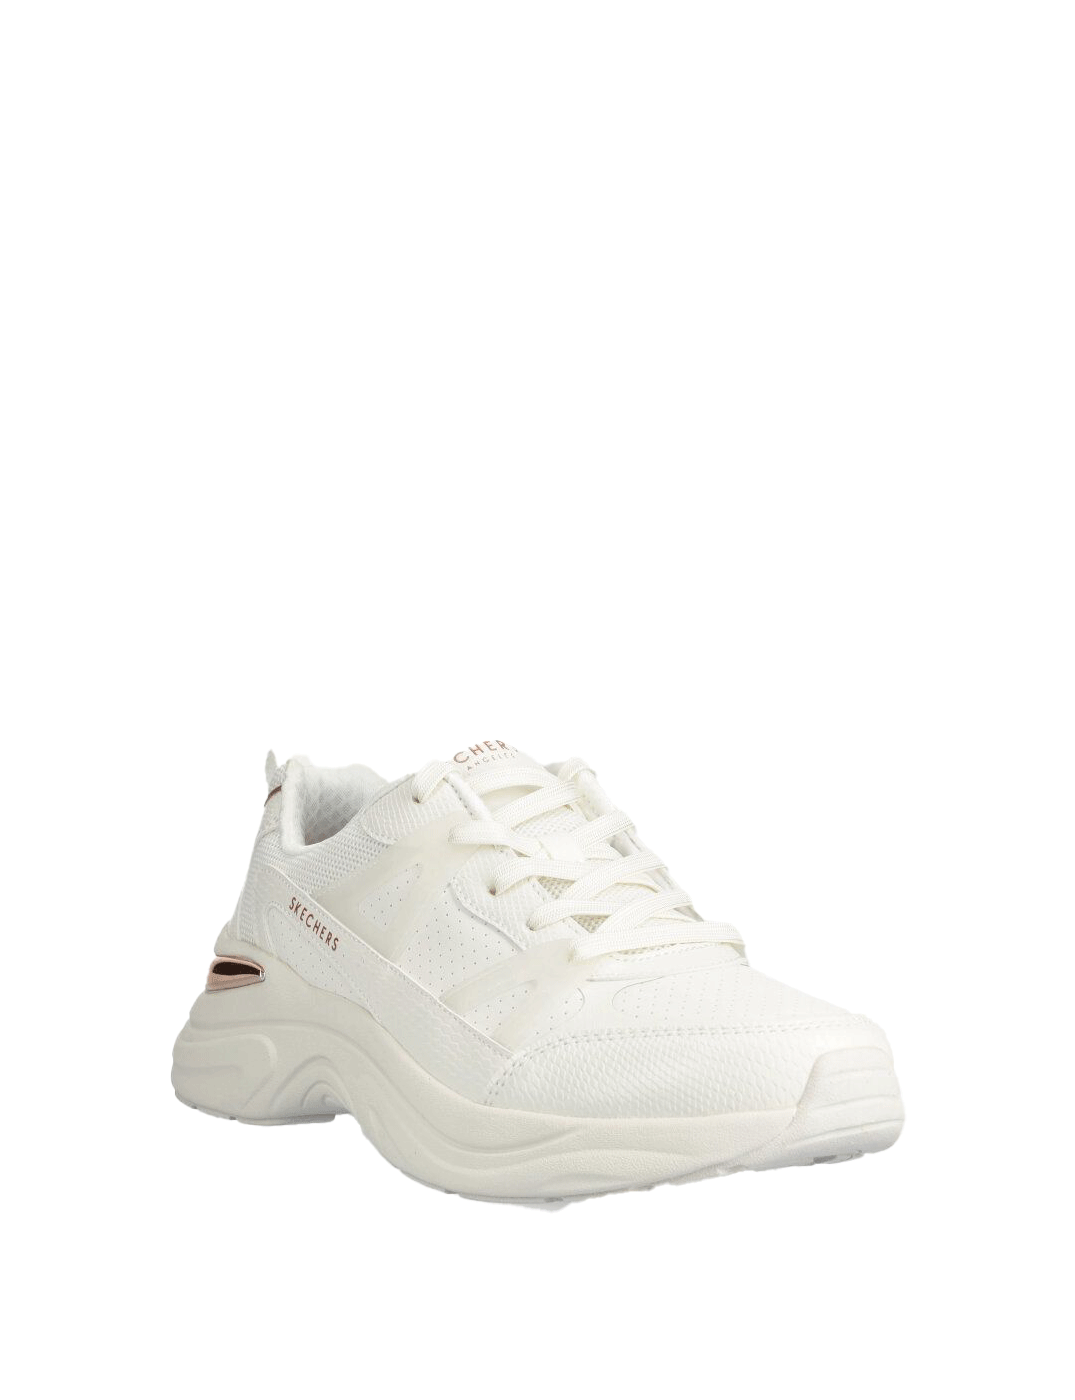 Guess Vibo In White Brown For Women  Salerno Lace up Thick Trainers –  4feetshoes